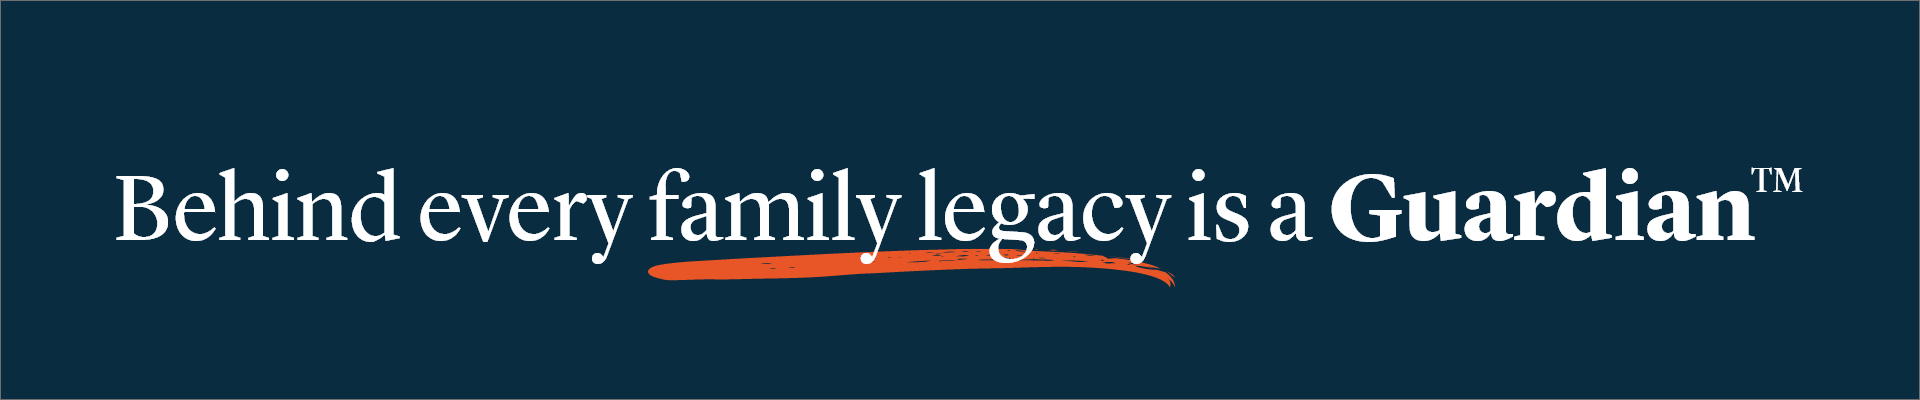 Behind every family legacy is a Guardian™